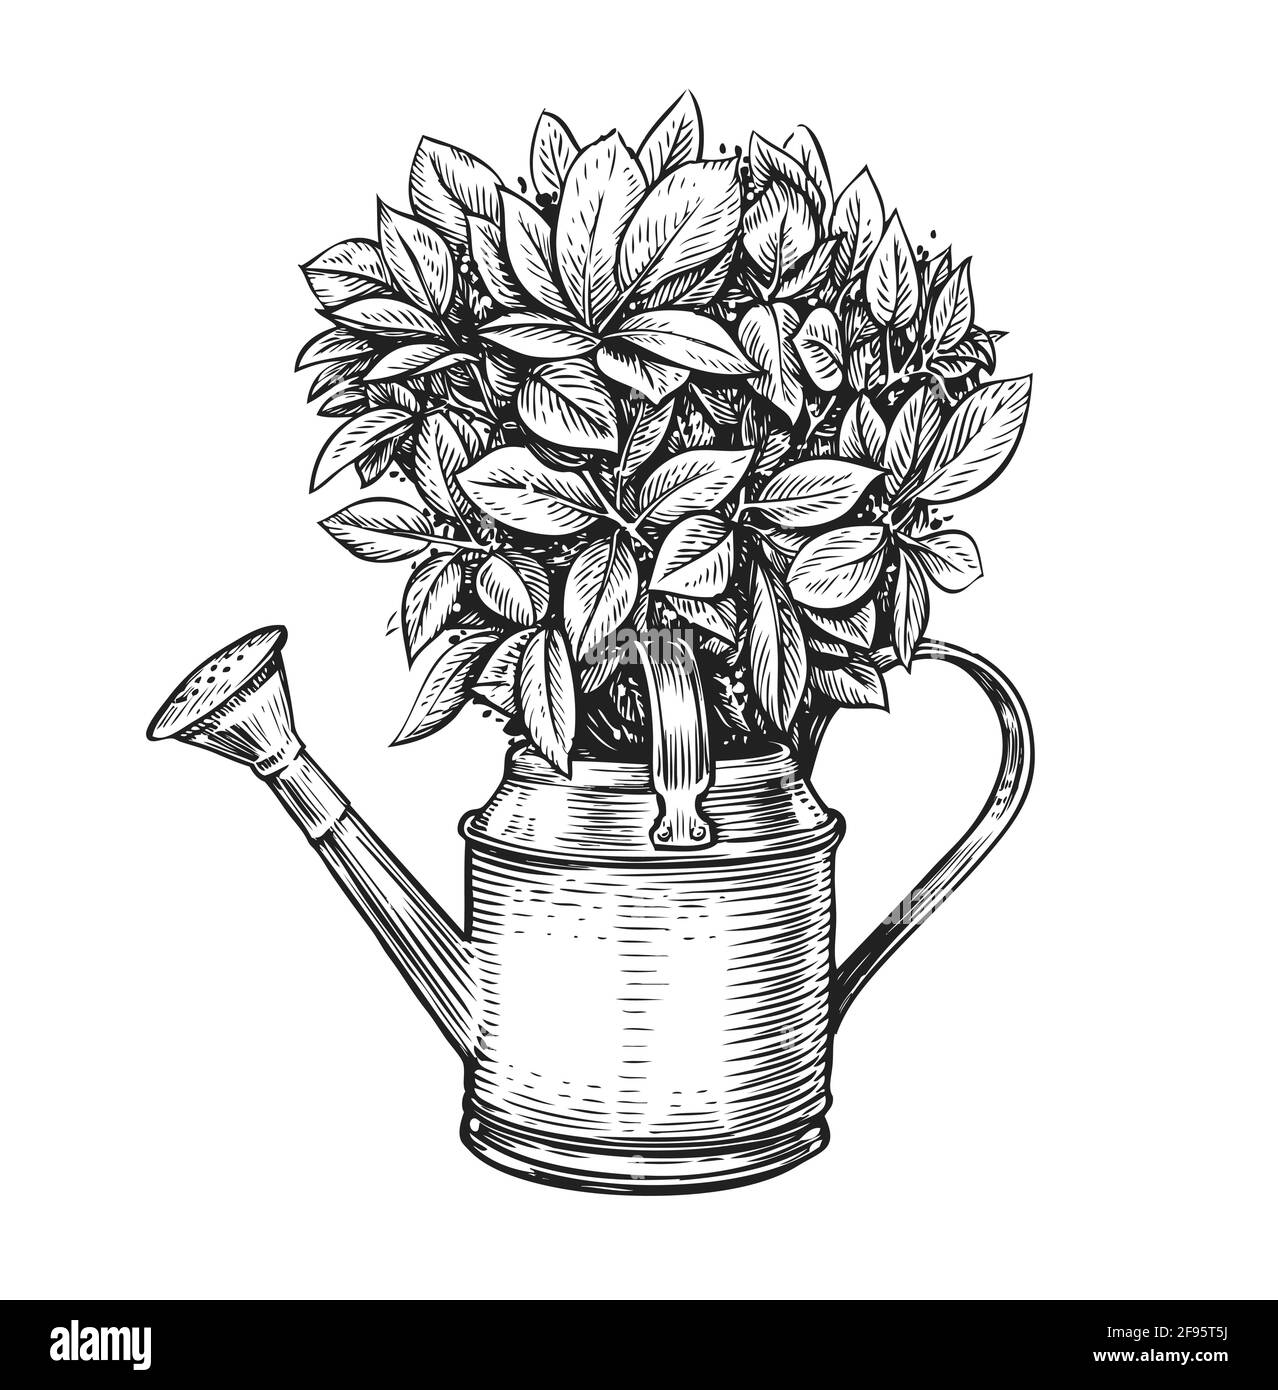 Flowers in a pot. Bouquet and watering can in sketch style ...